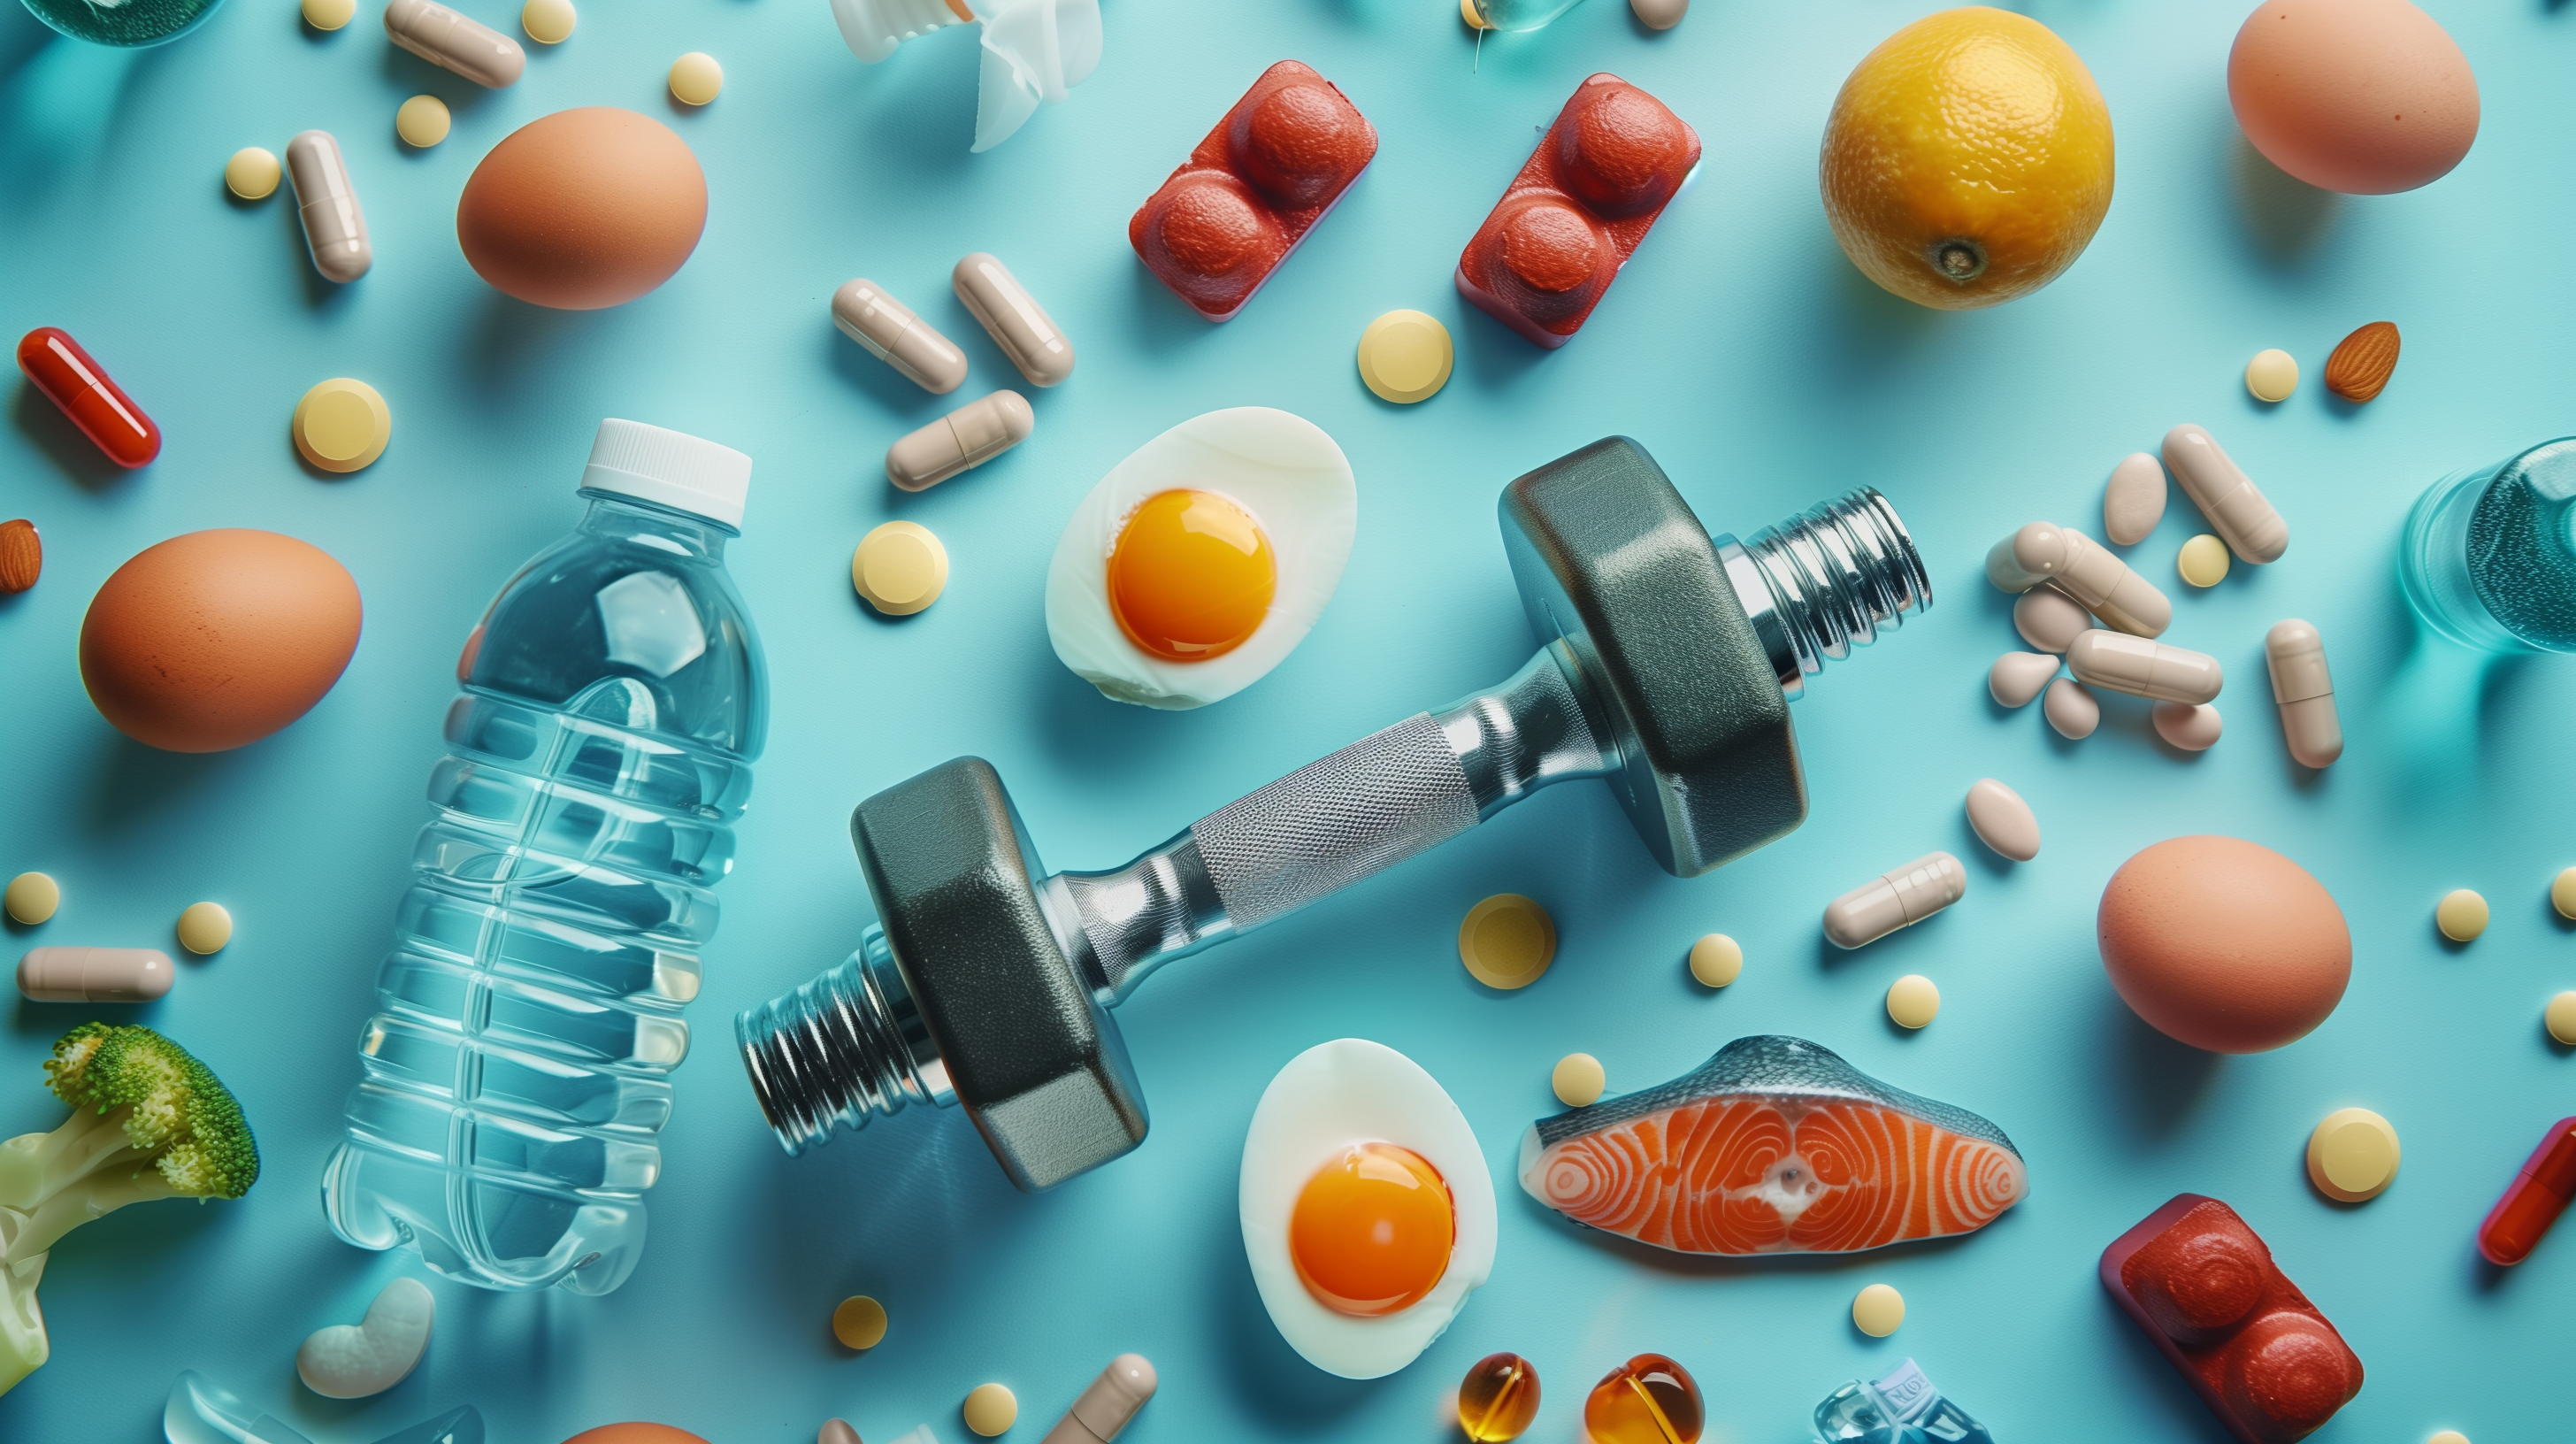 supplement capsules, a dumbbell, and a transparent water bottle, and high-protein foods